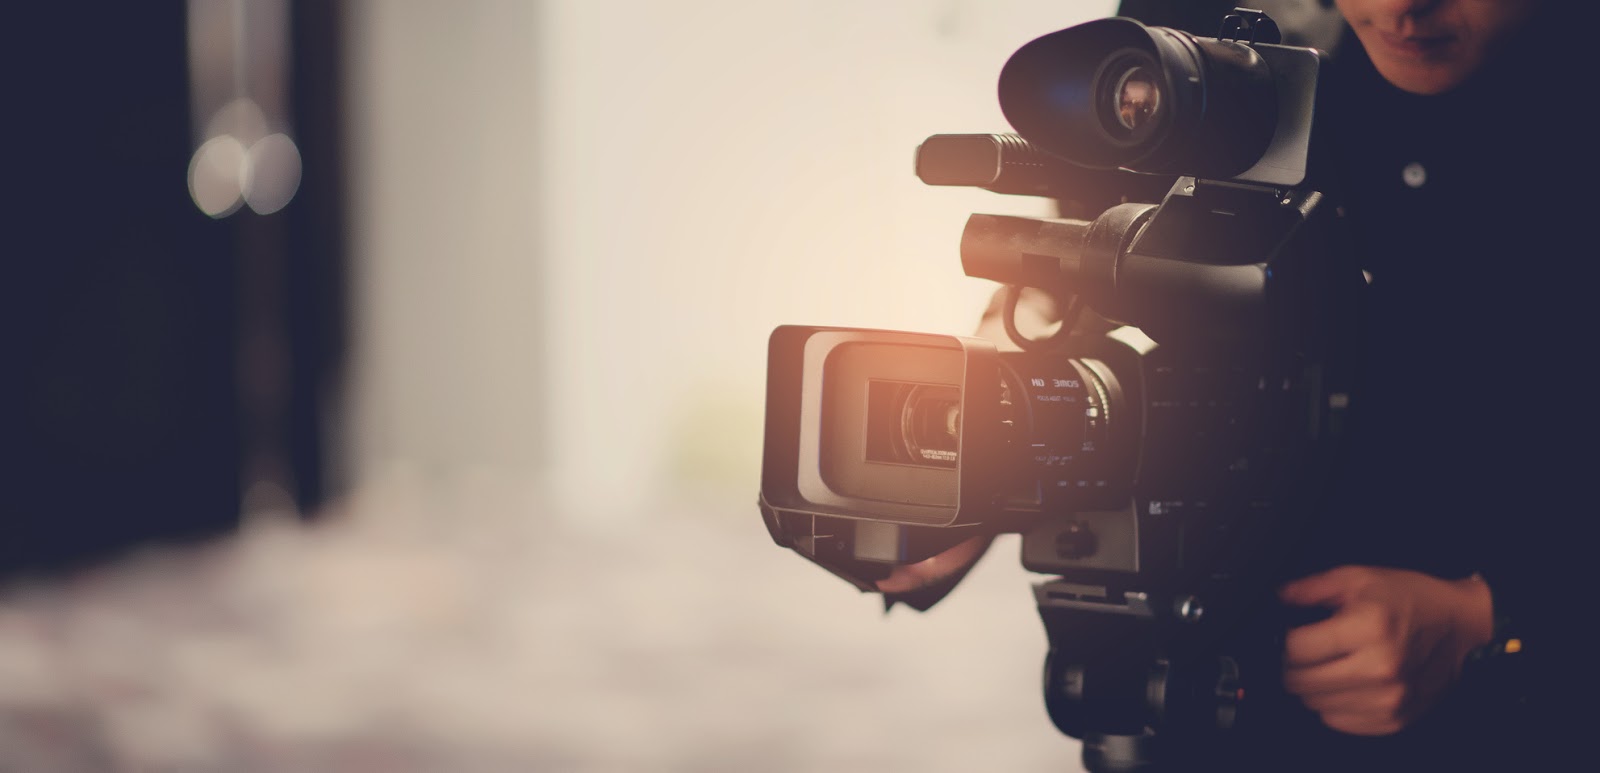 Want to Become a Videographer? It’s Easier Than You Think